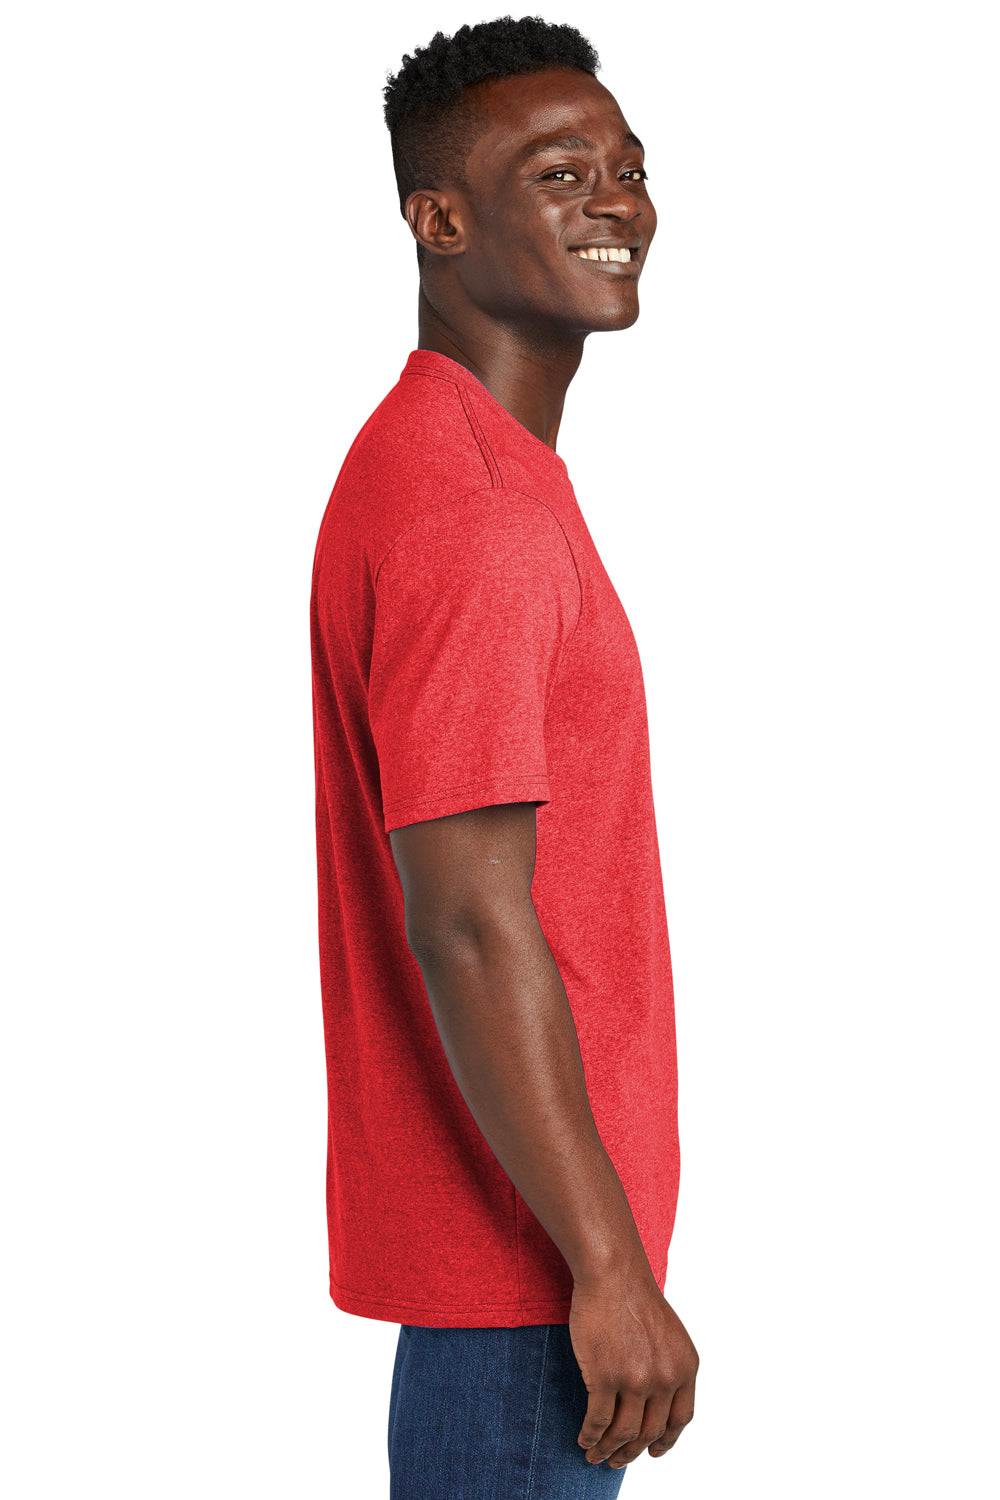 Allmade AL2300 Mens Recycled Short Sleeve Crewneck T-Shirt Heather Red Model Side